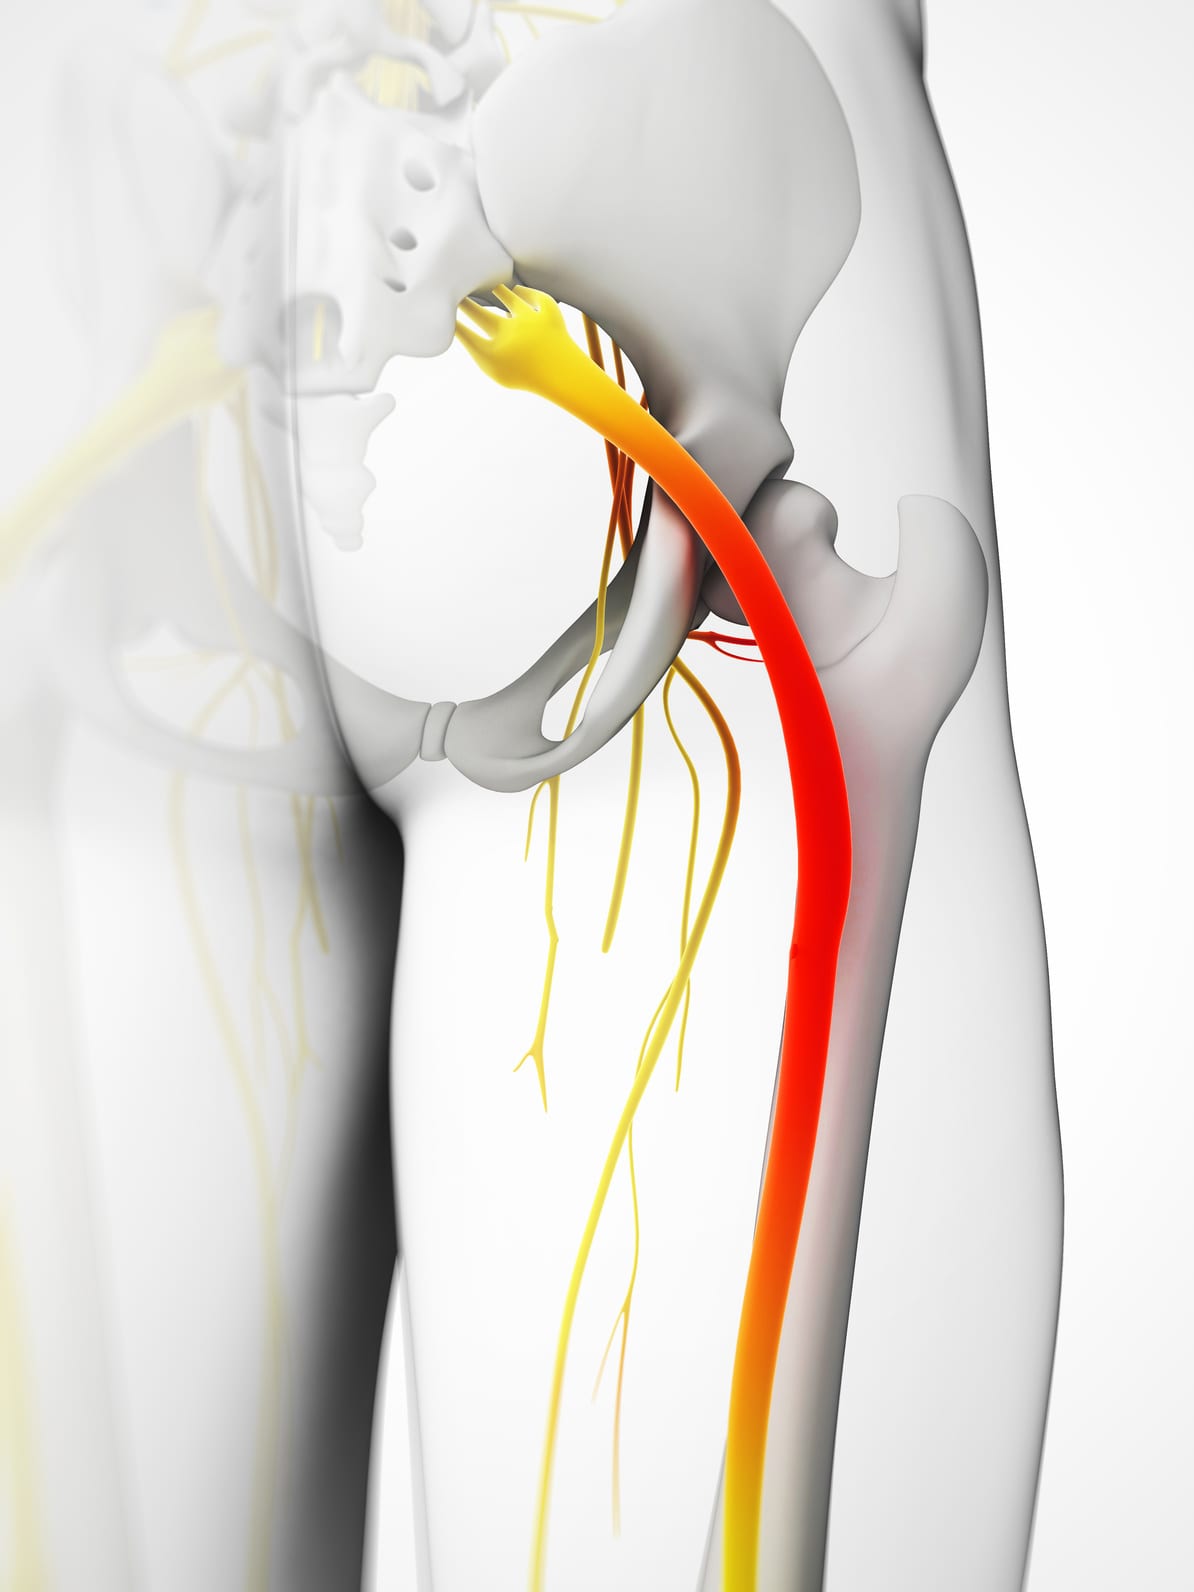 What You Need To Know: Anatomy of the Sciatic Nerve | Spine Center of